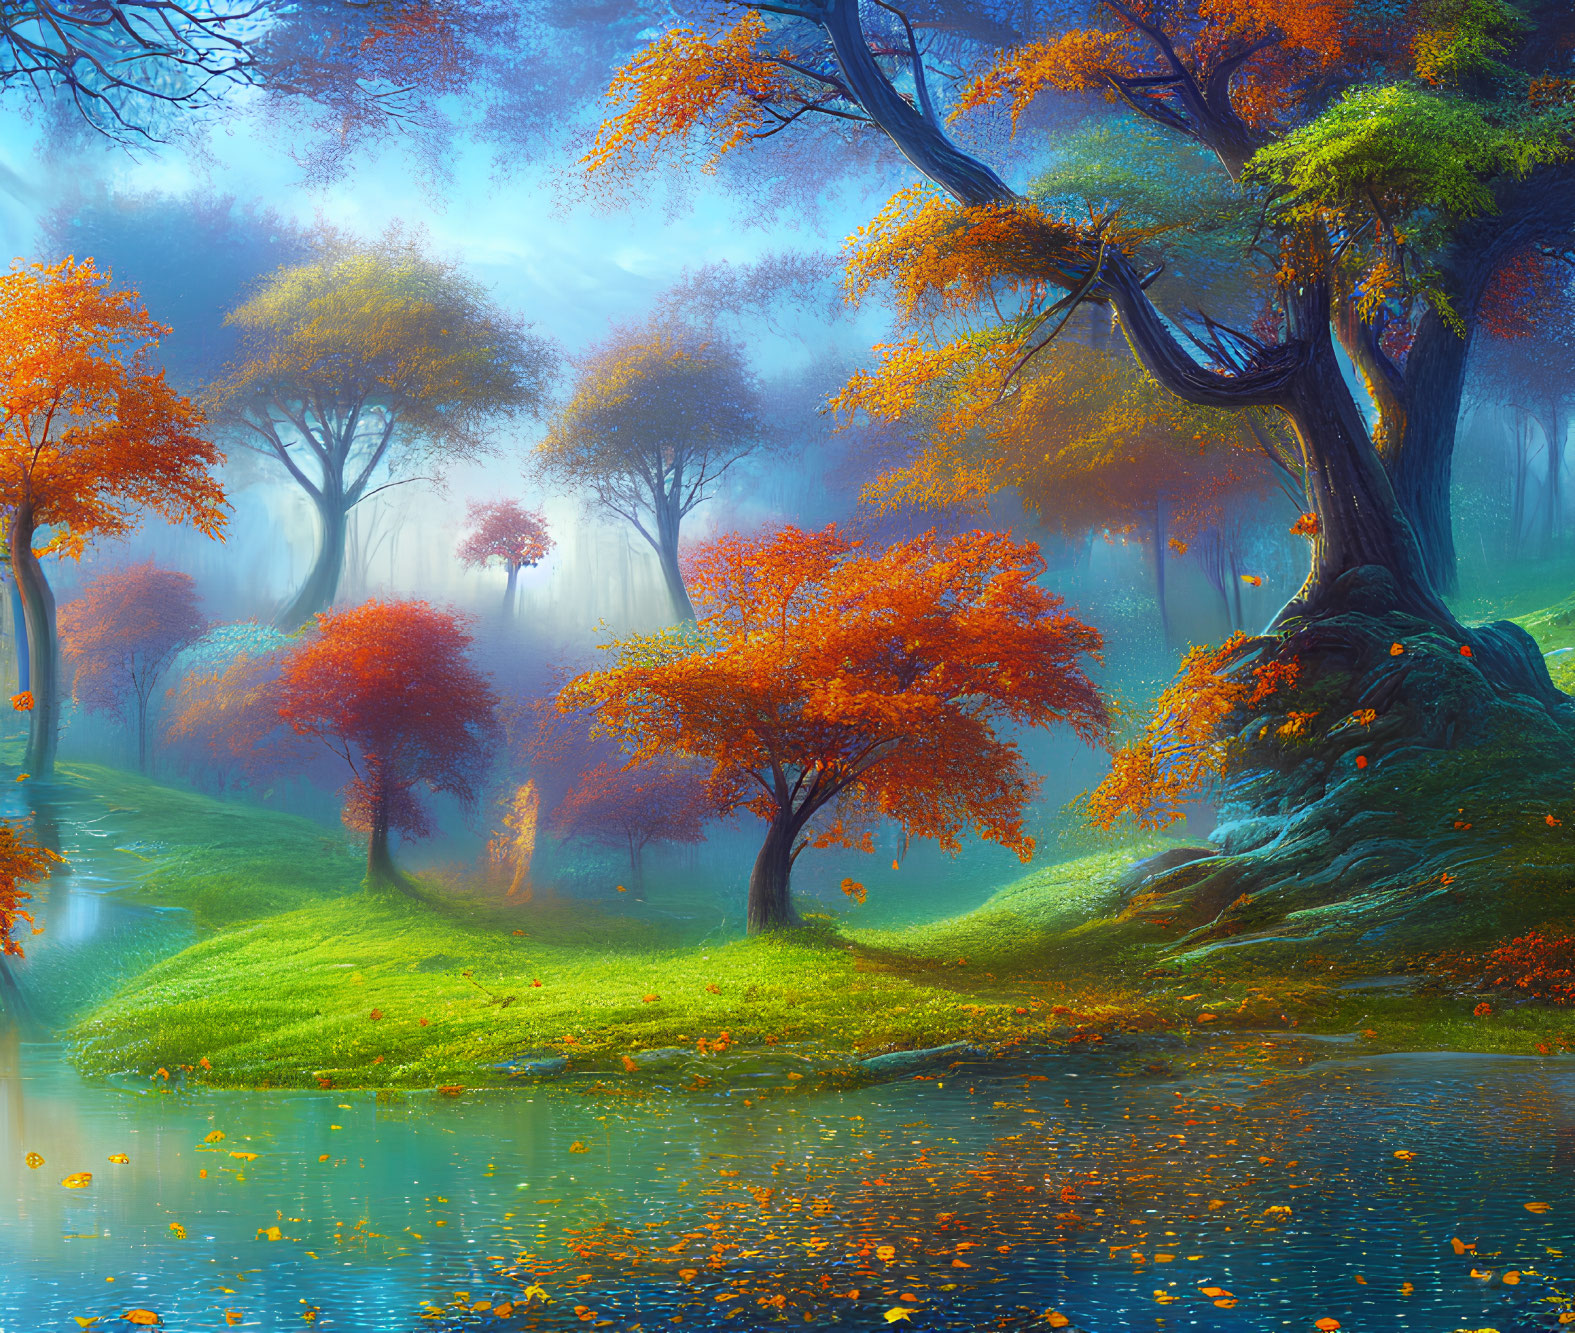 Colorful autumn trees reflecting in tranquil lake in misty landscape